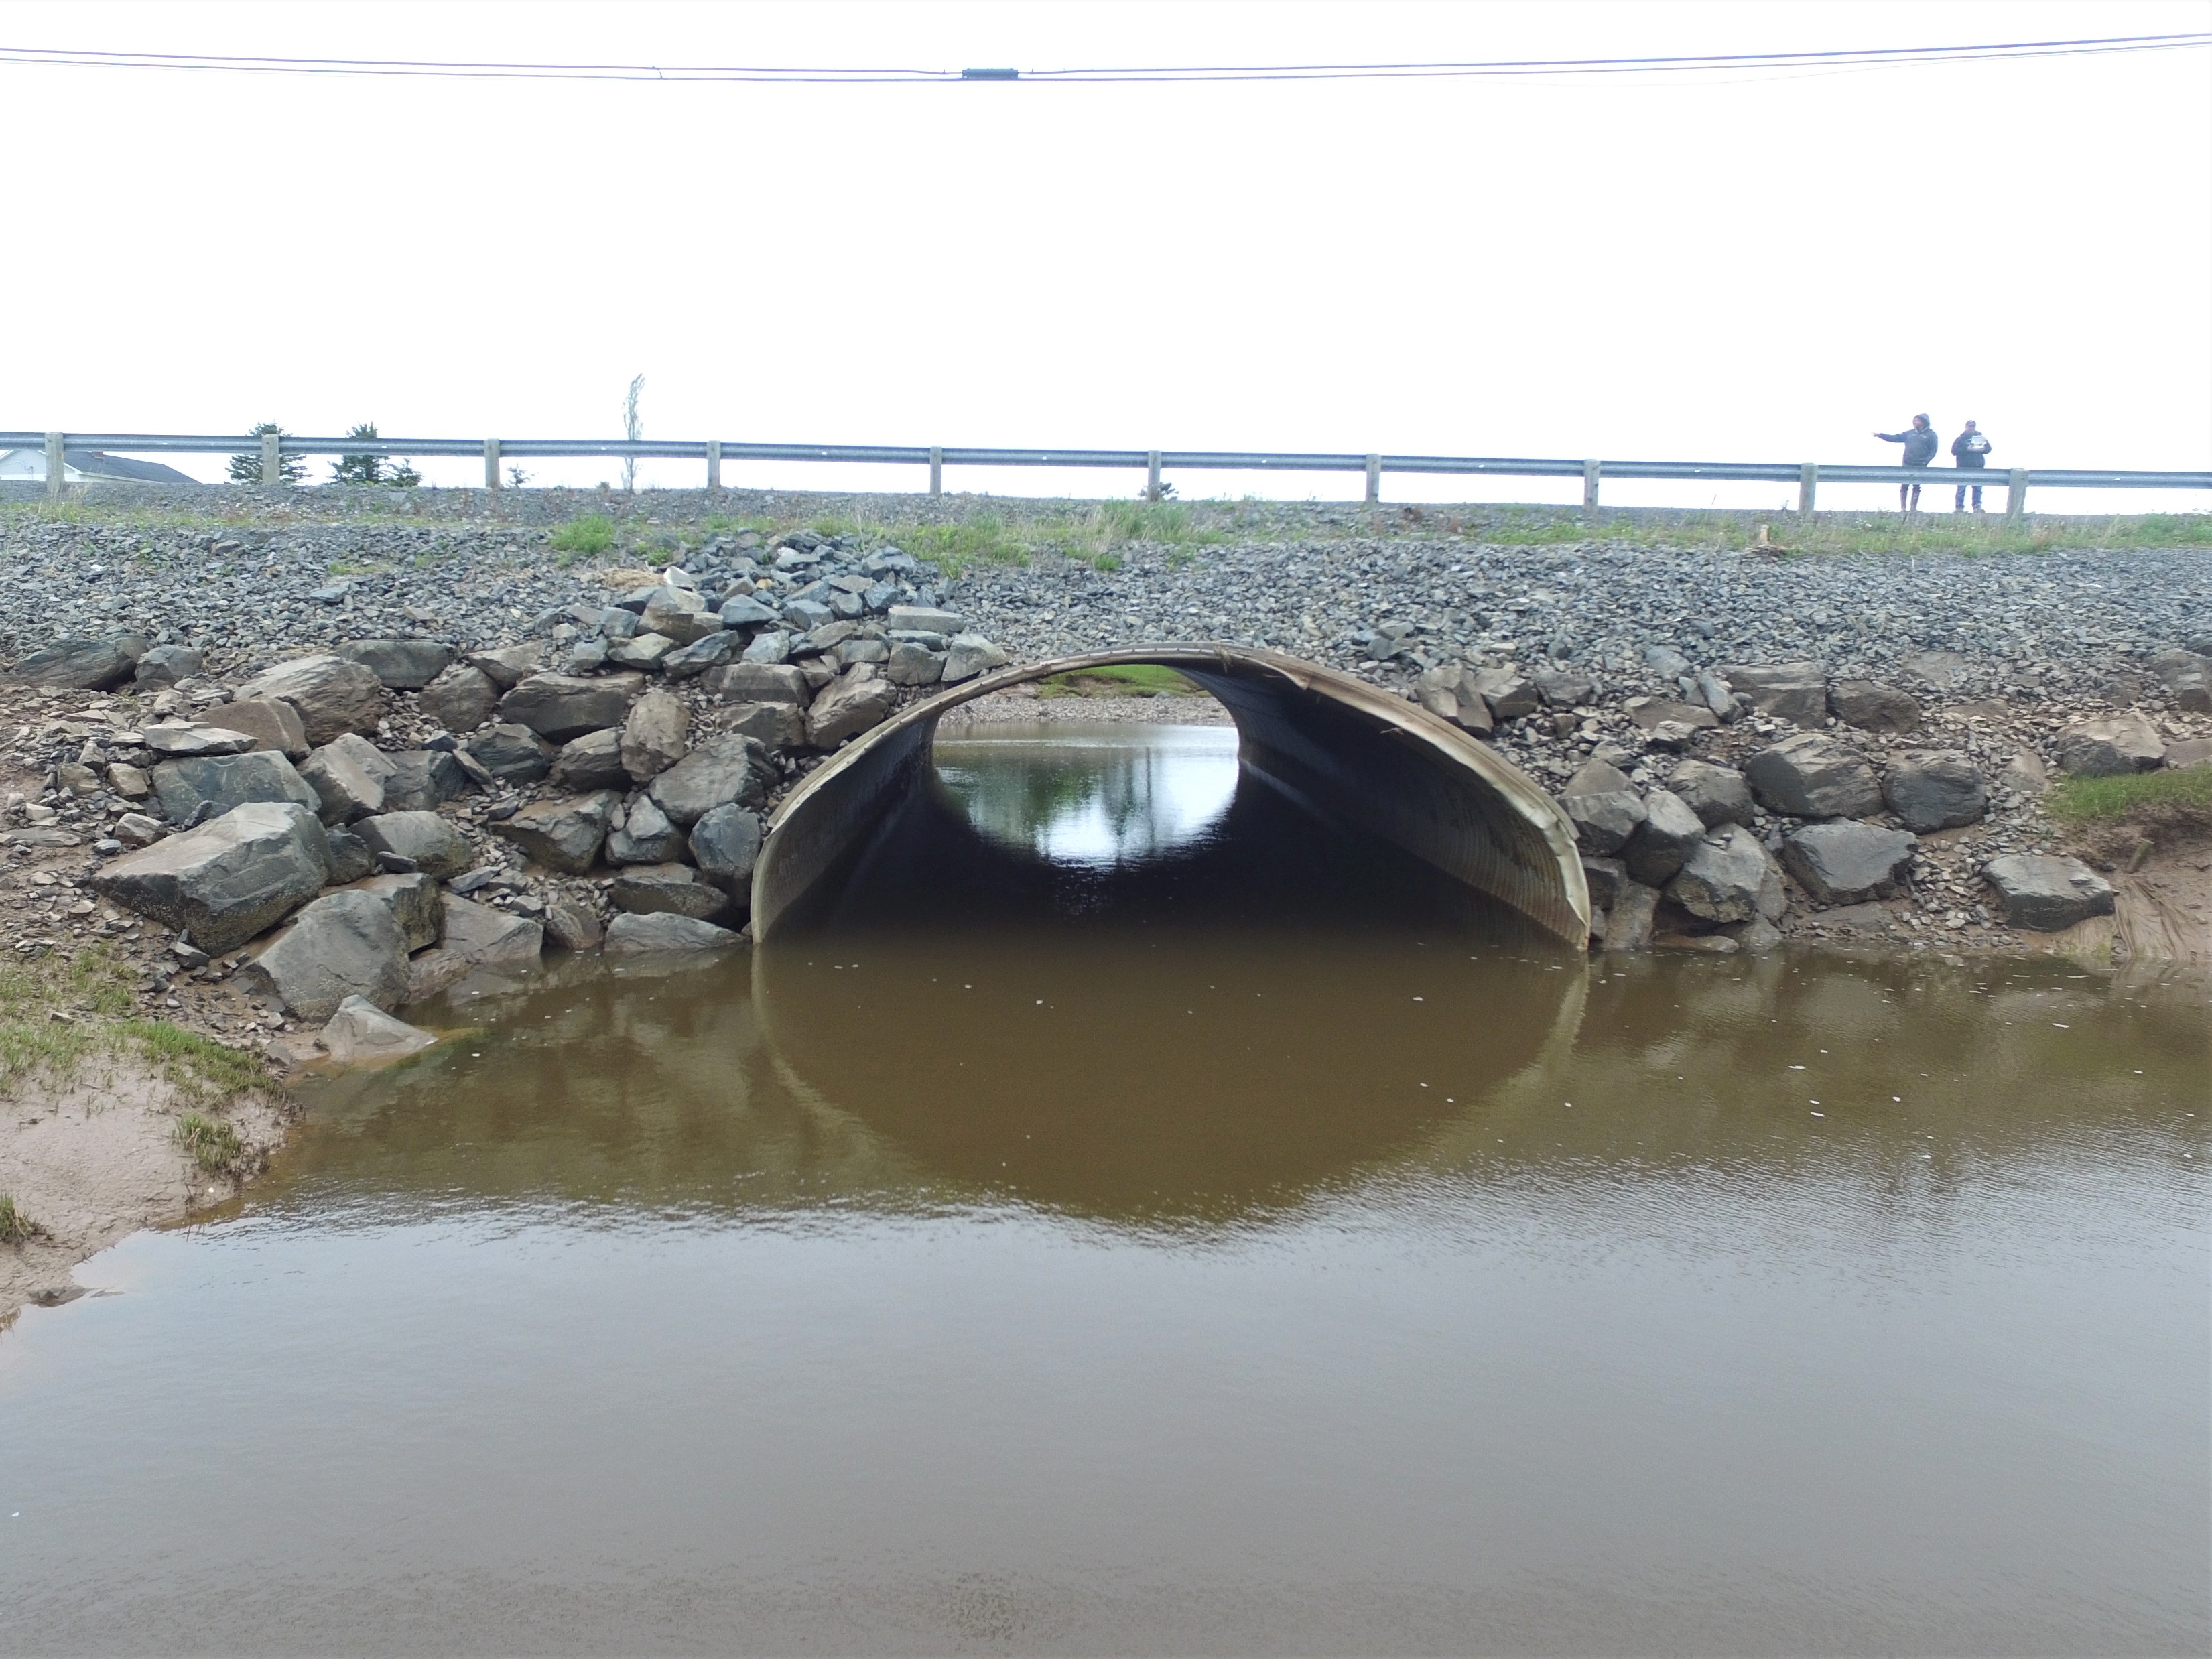 A large elliptical-shaped culvert under a road. There are large boulders on either side of the culvert.